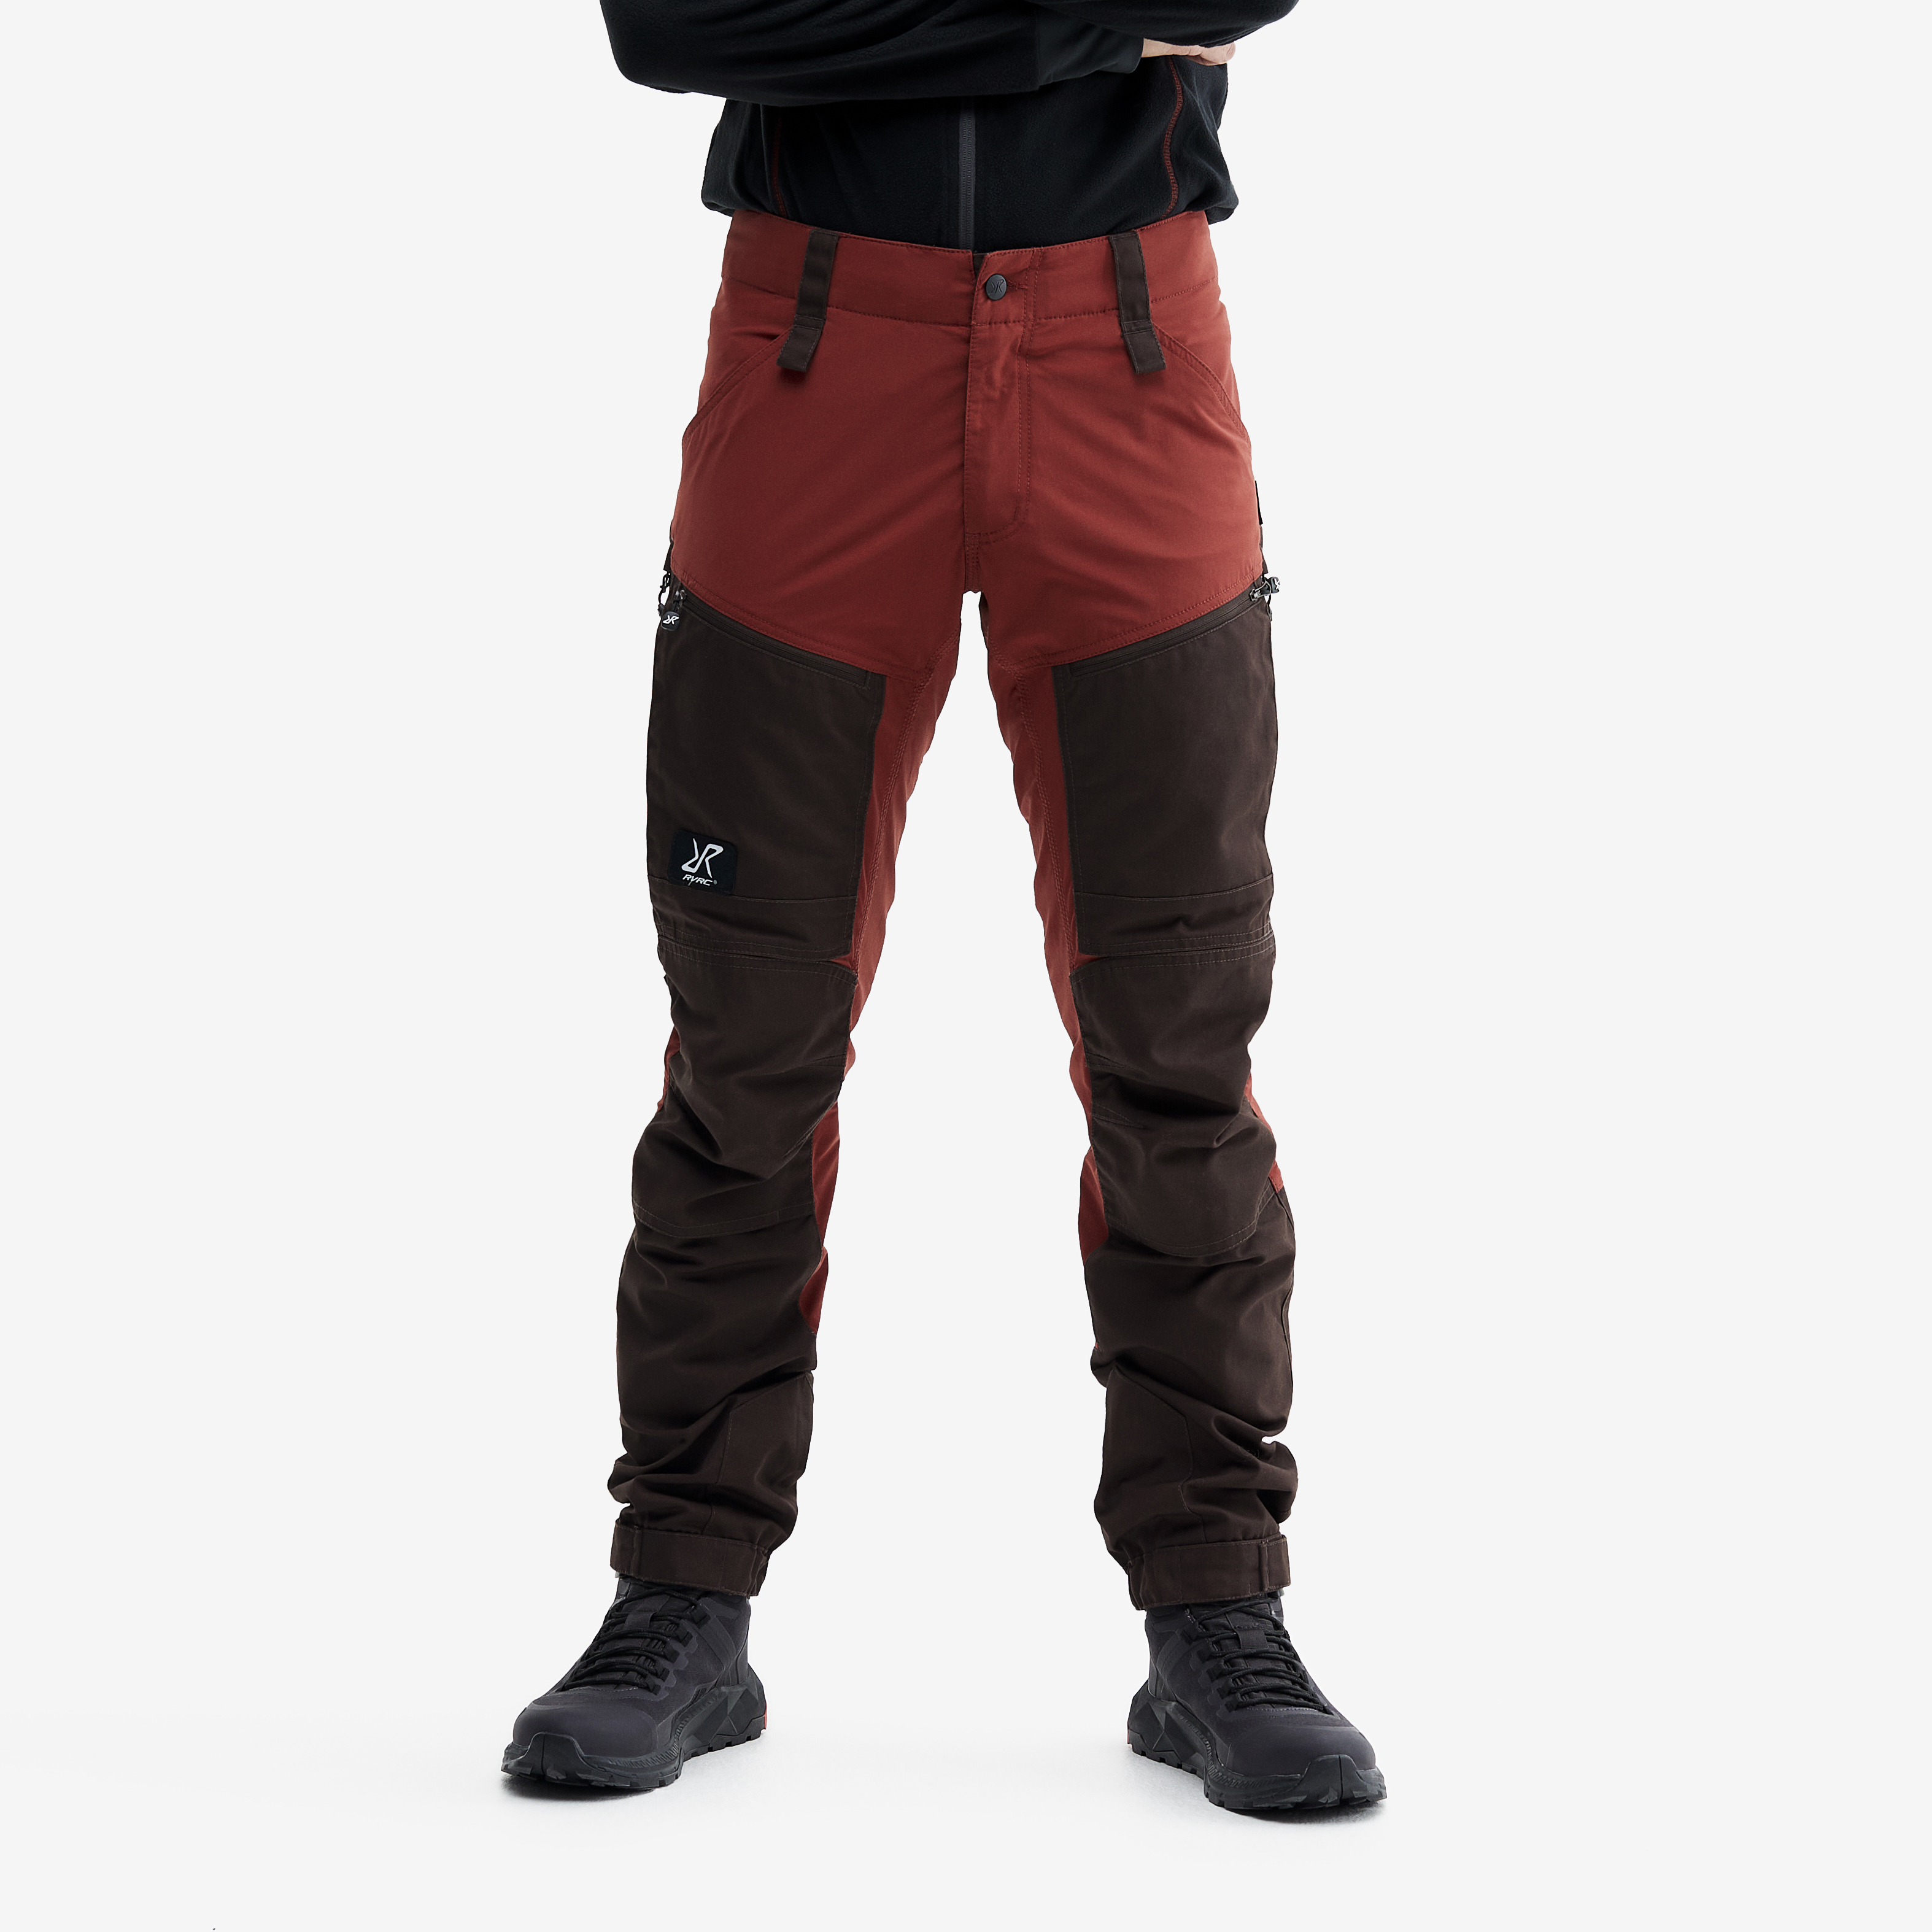 RVRC GP Pro hiking trousers for men in brown